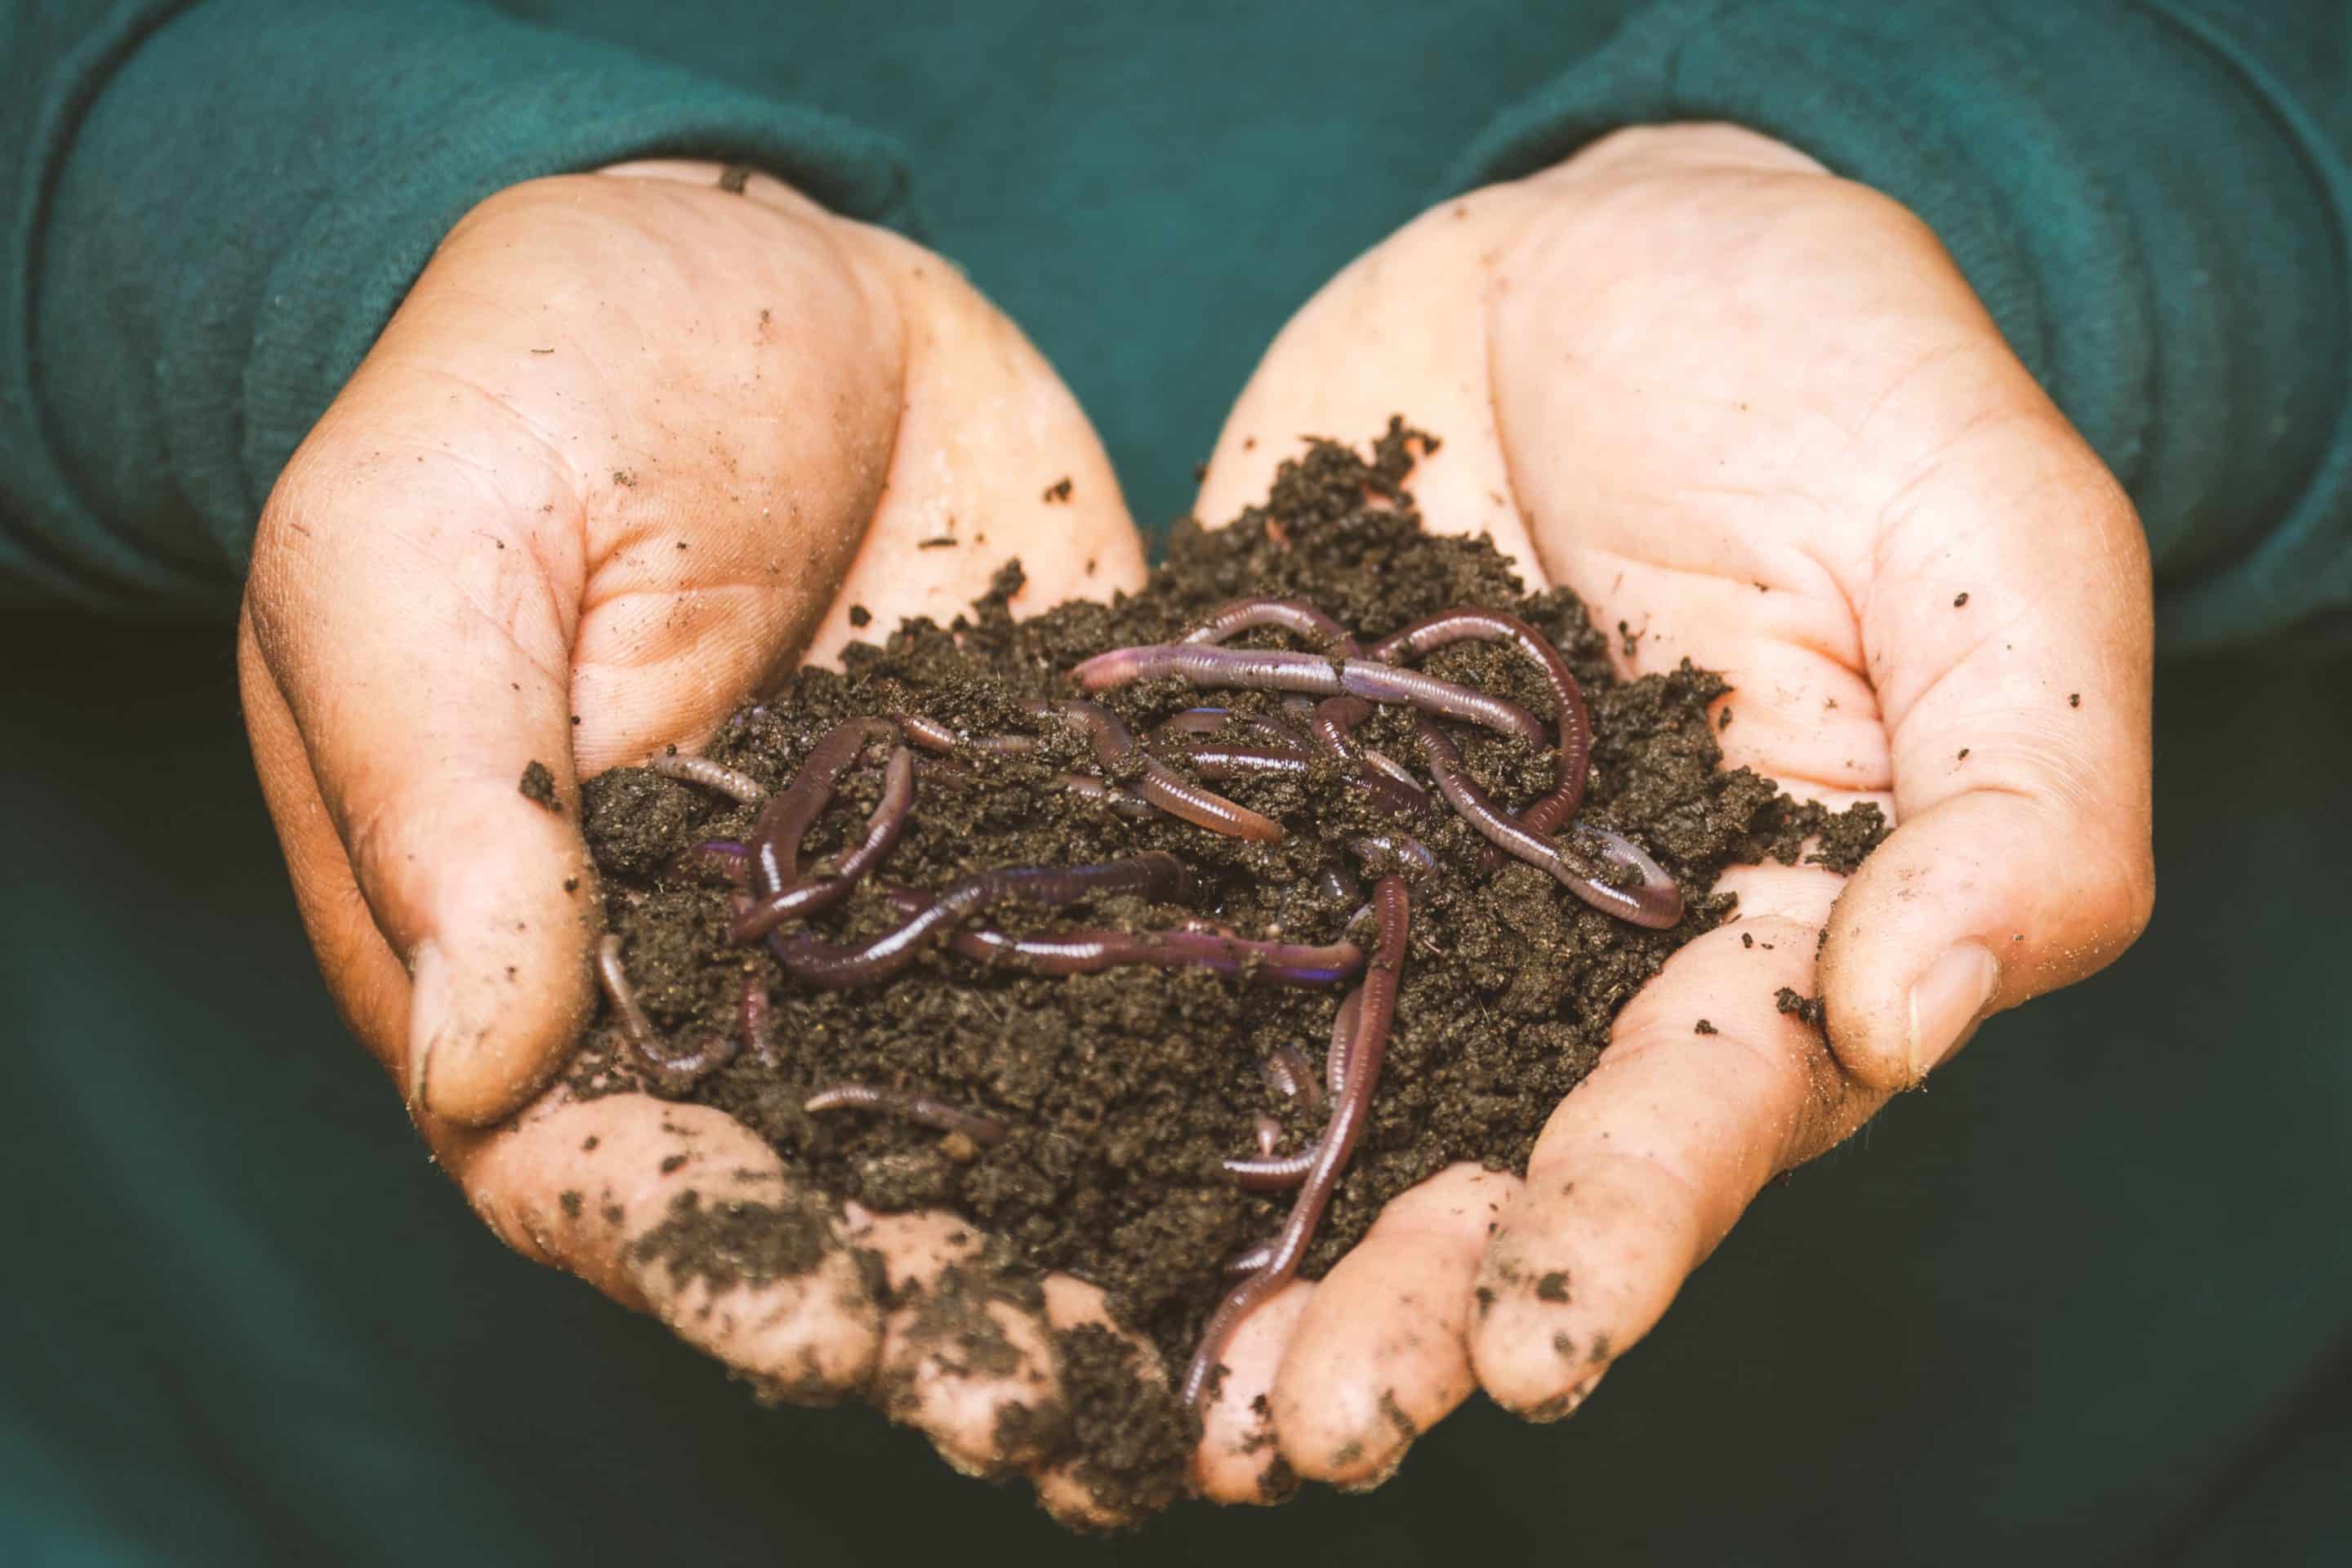 Worms in soil